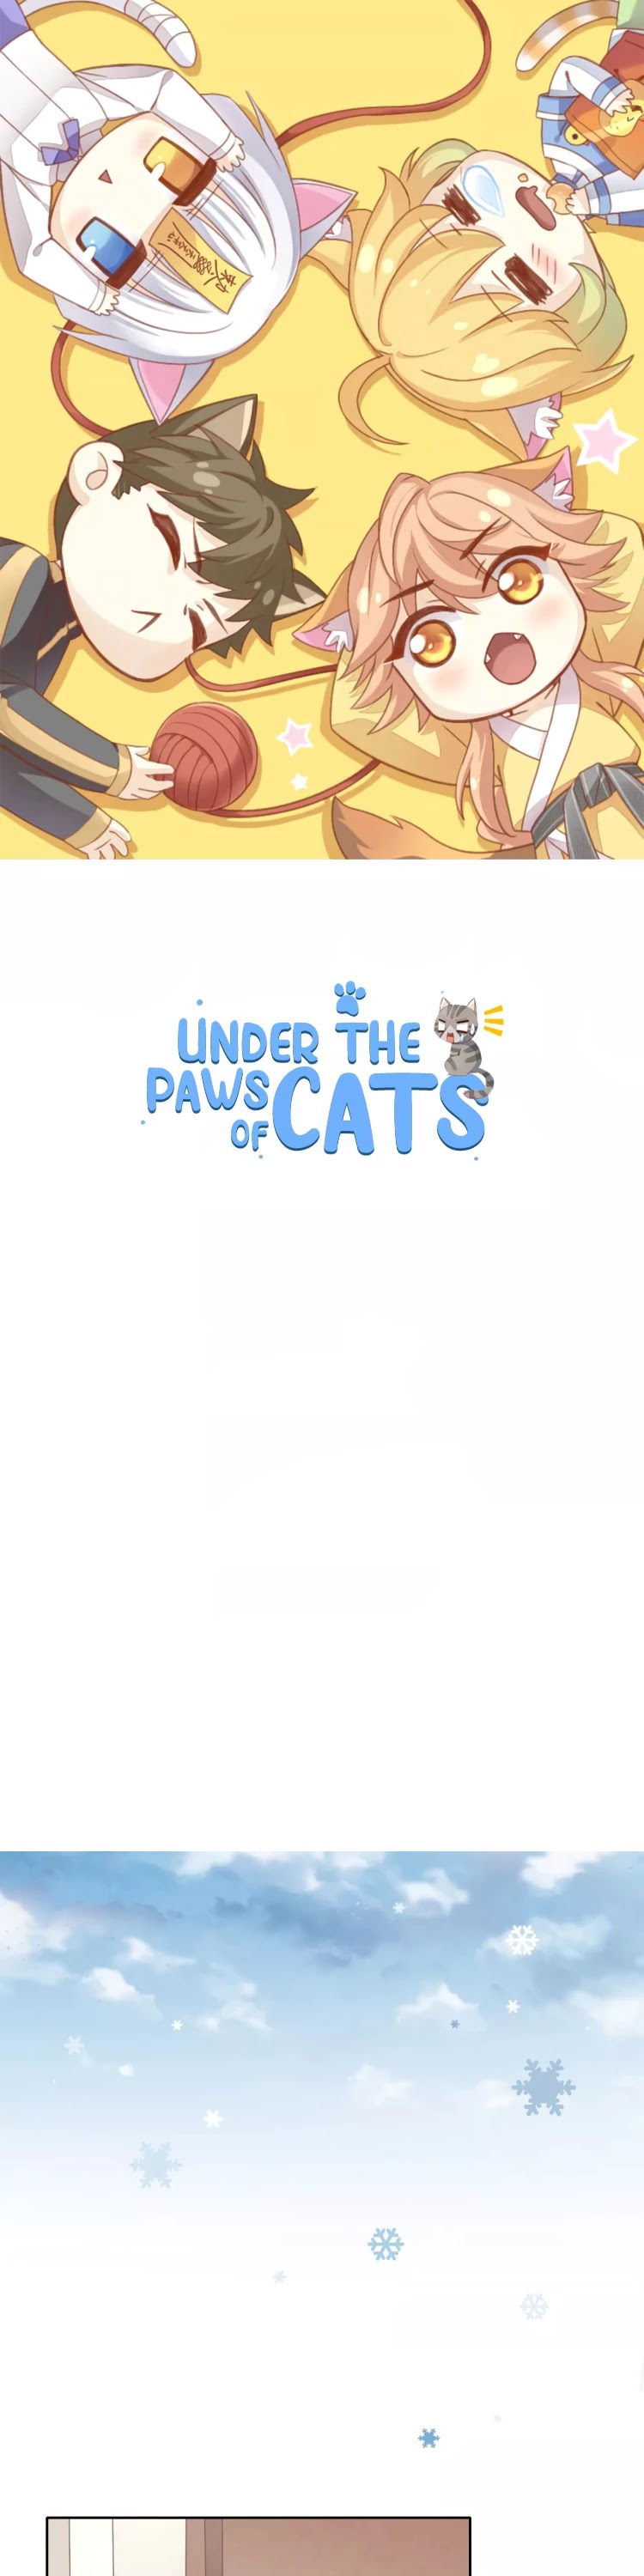 Under The Paws Of Cats - Page 2